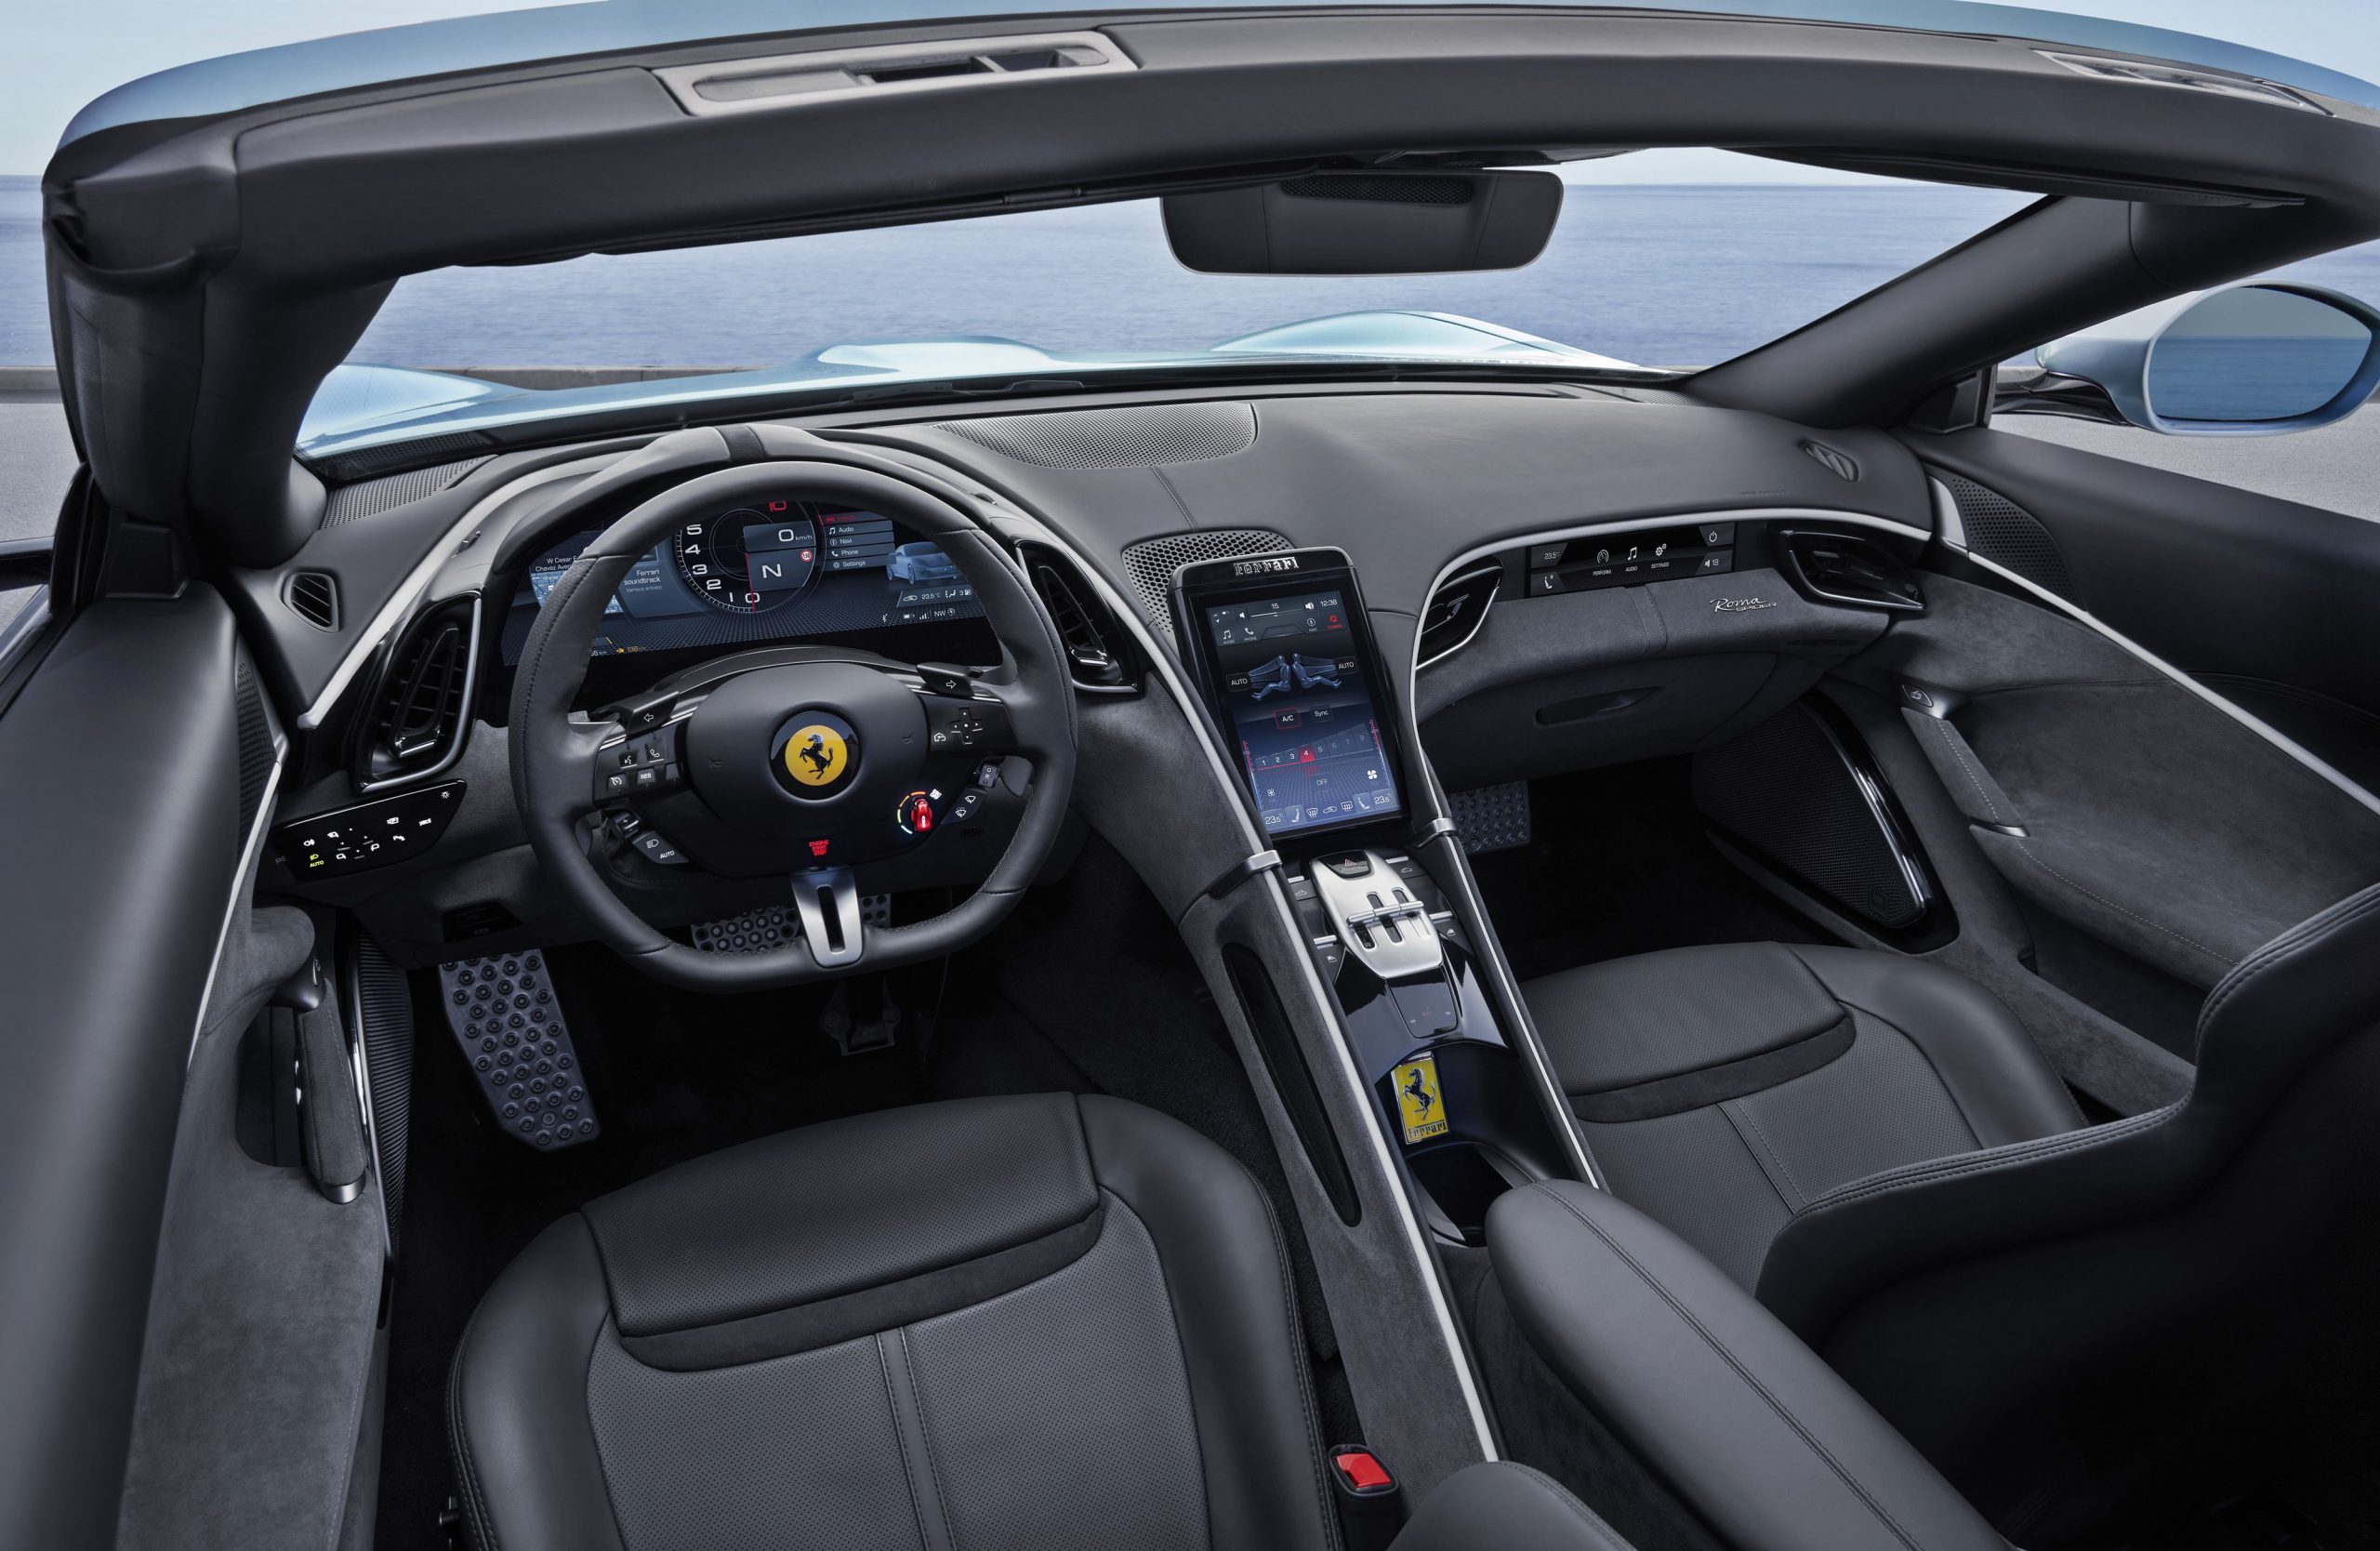 ferrari roma spider – a soft-top convertible from ferrari after 18 years